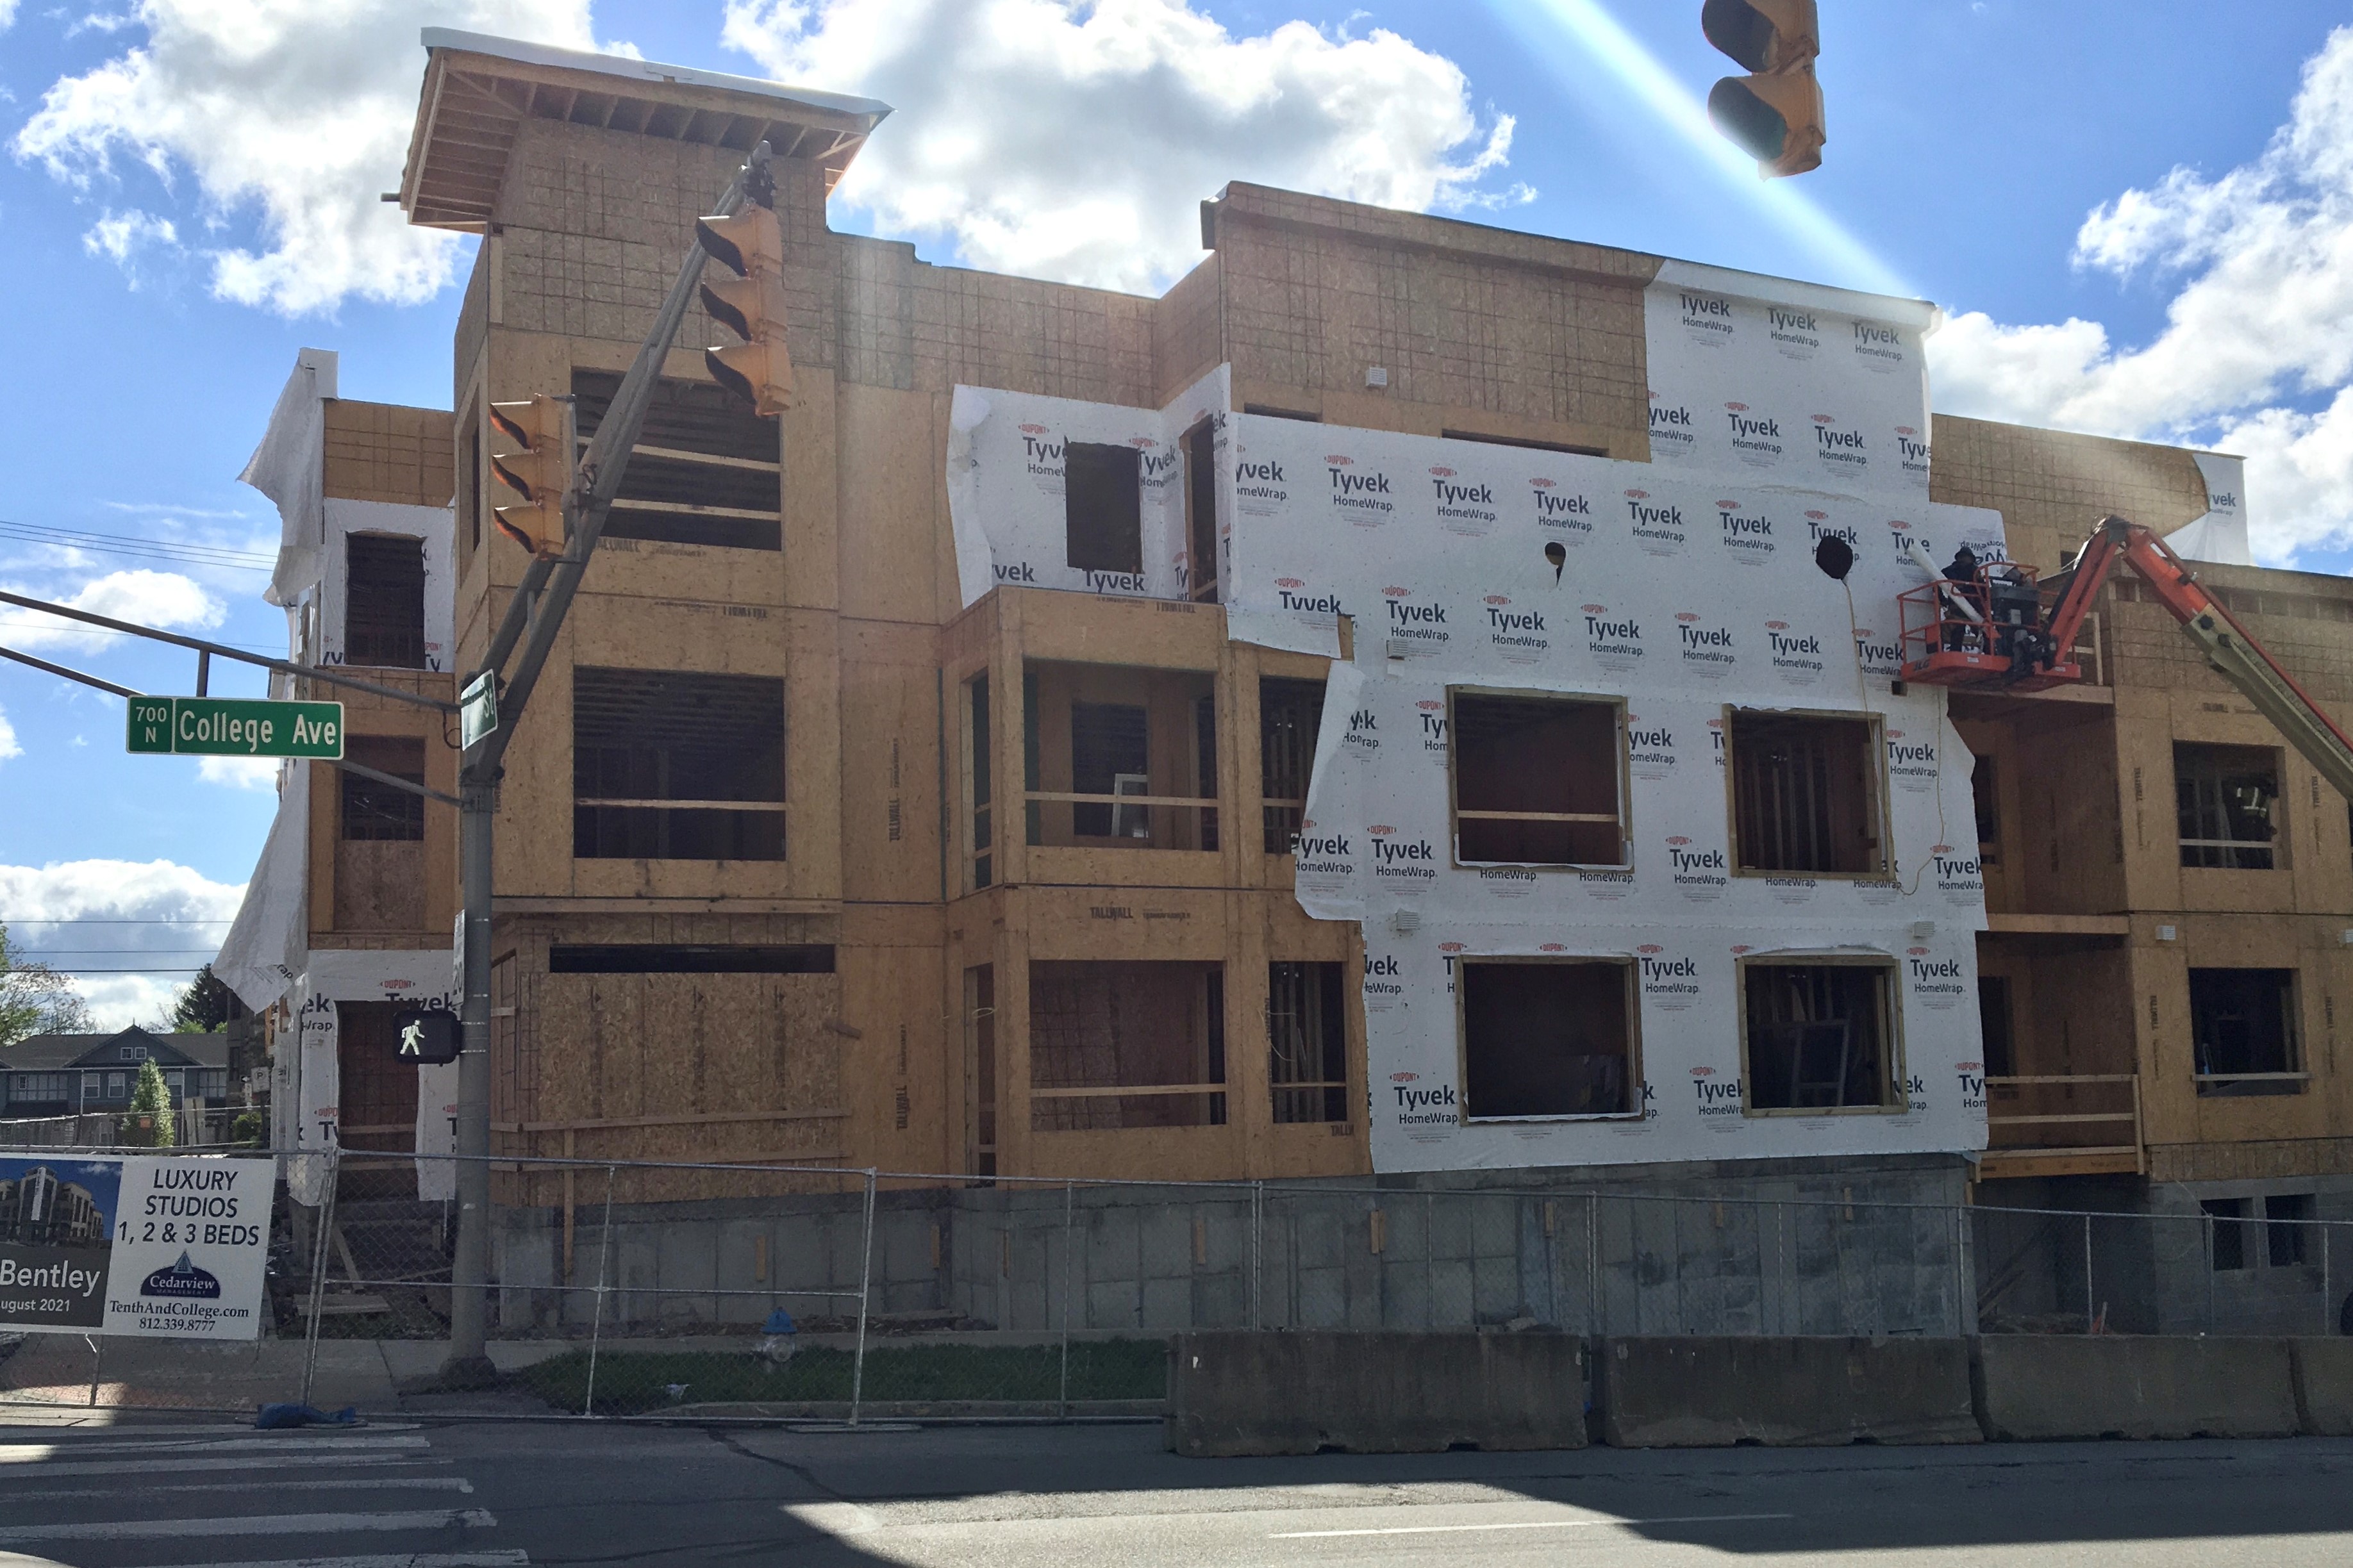 The Bentley apartment complex is under construction on the corner of 11th Street and College Avenue.